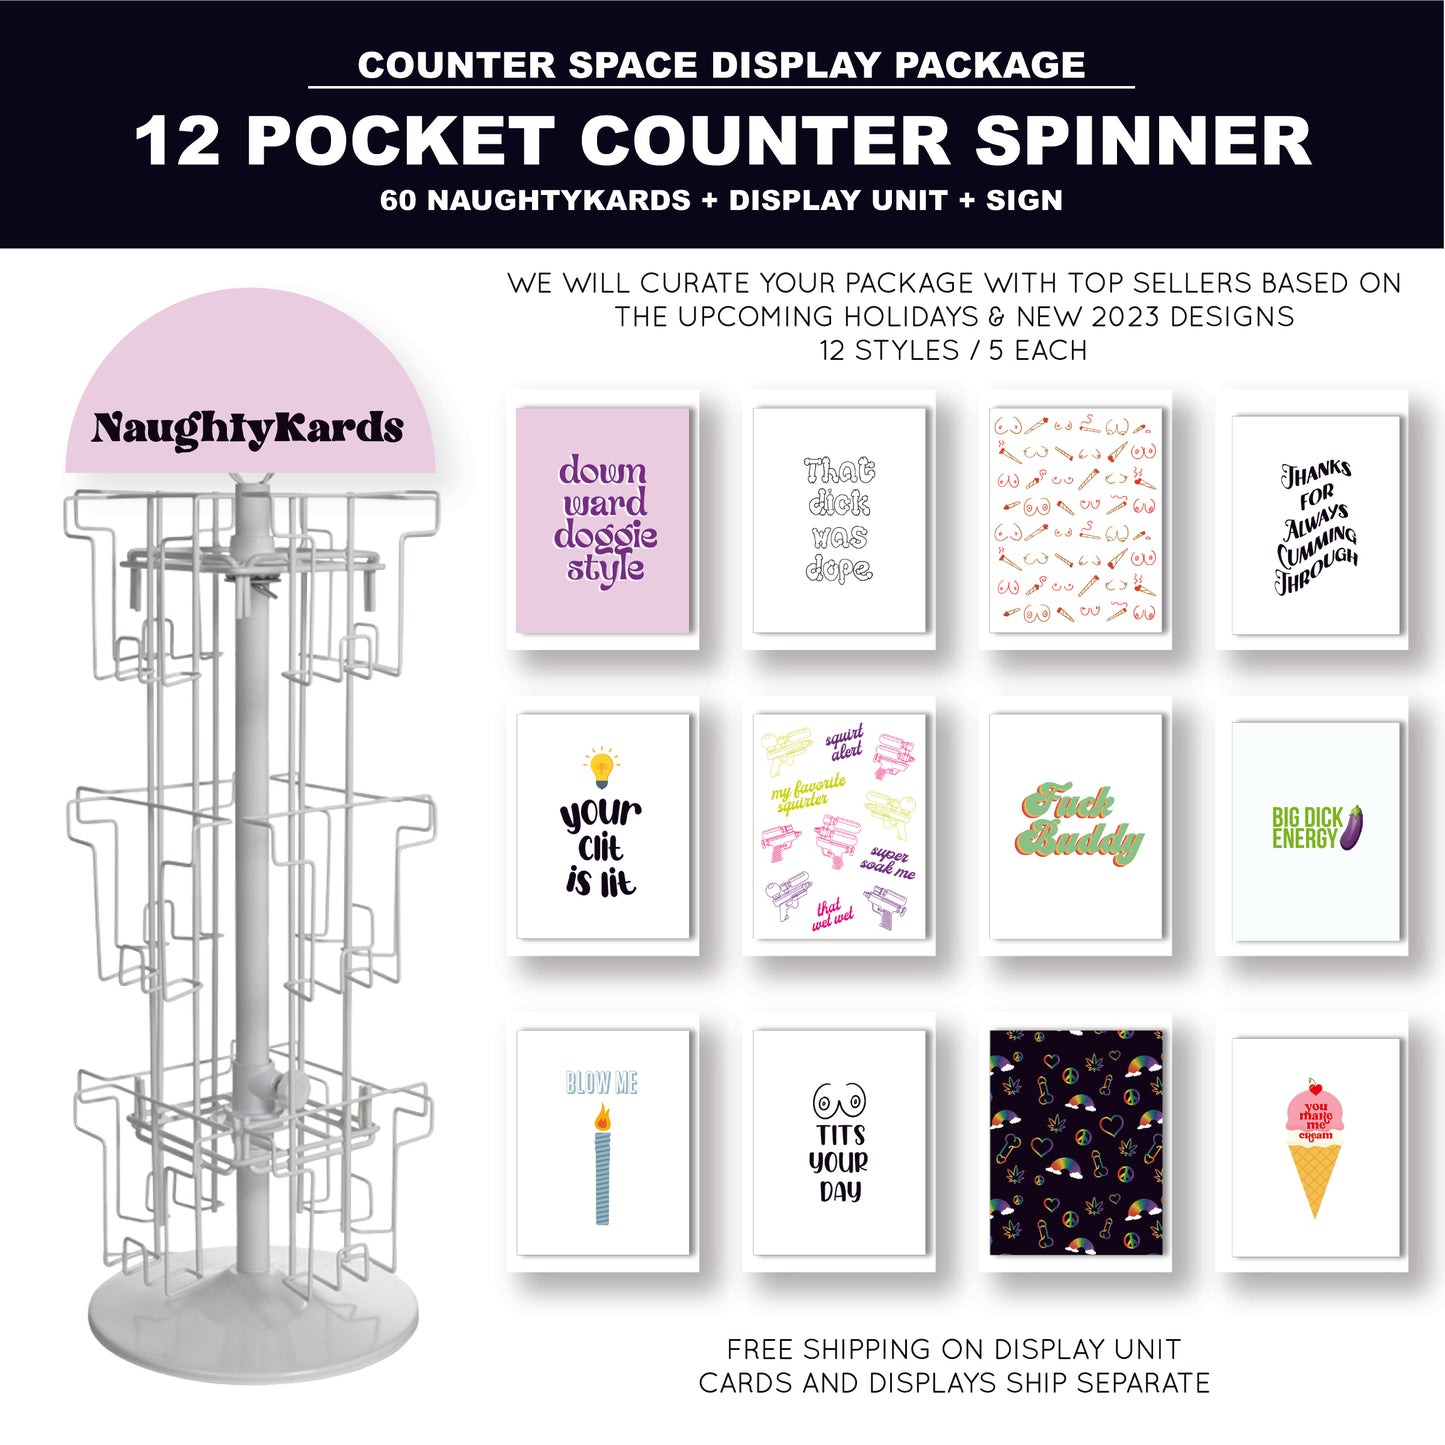 12 Pocket Spinner Counter Display Package